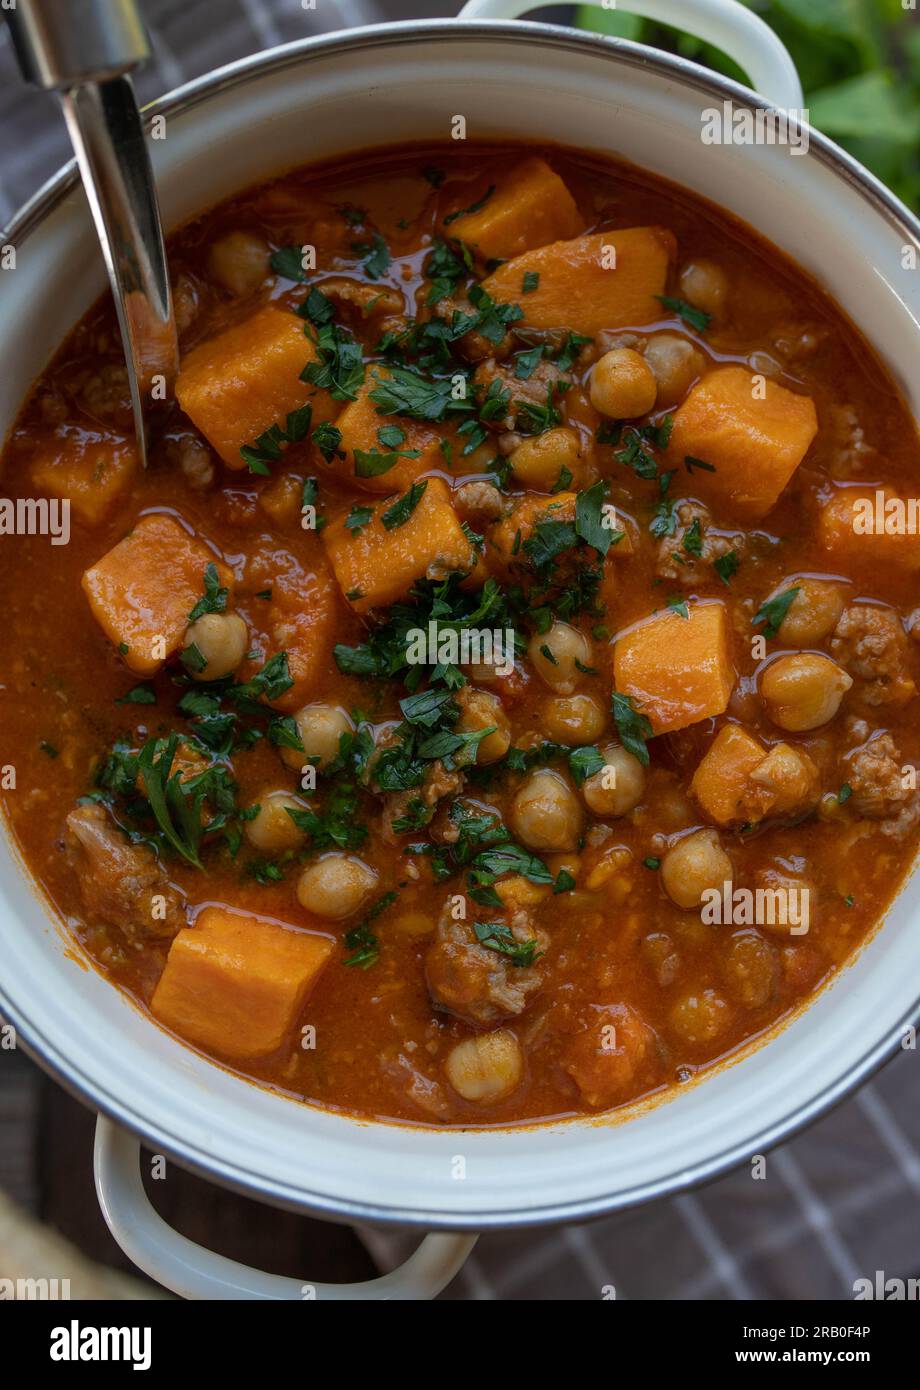 Stew with chickpeas, sweet potatoes and minced meat in a pot Stock Photo